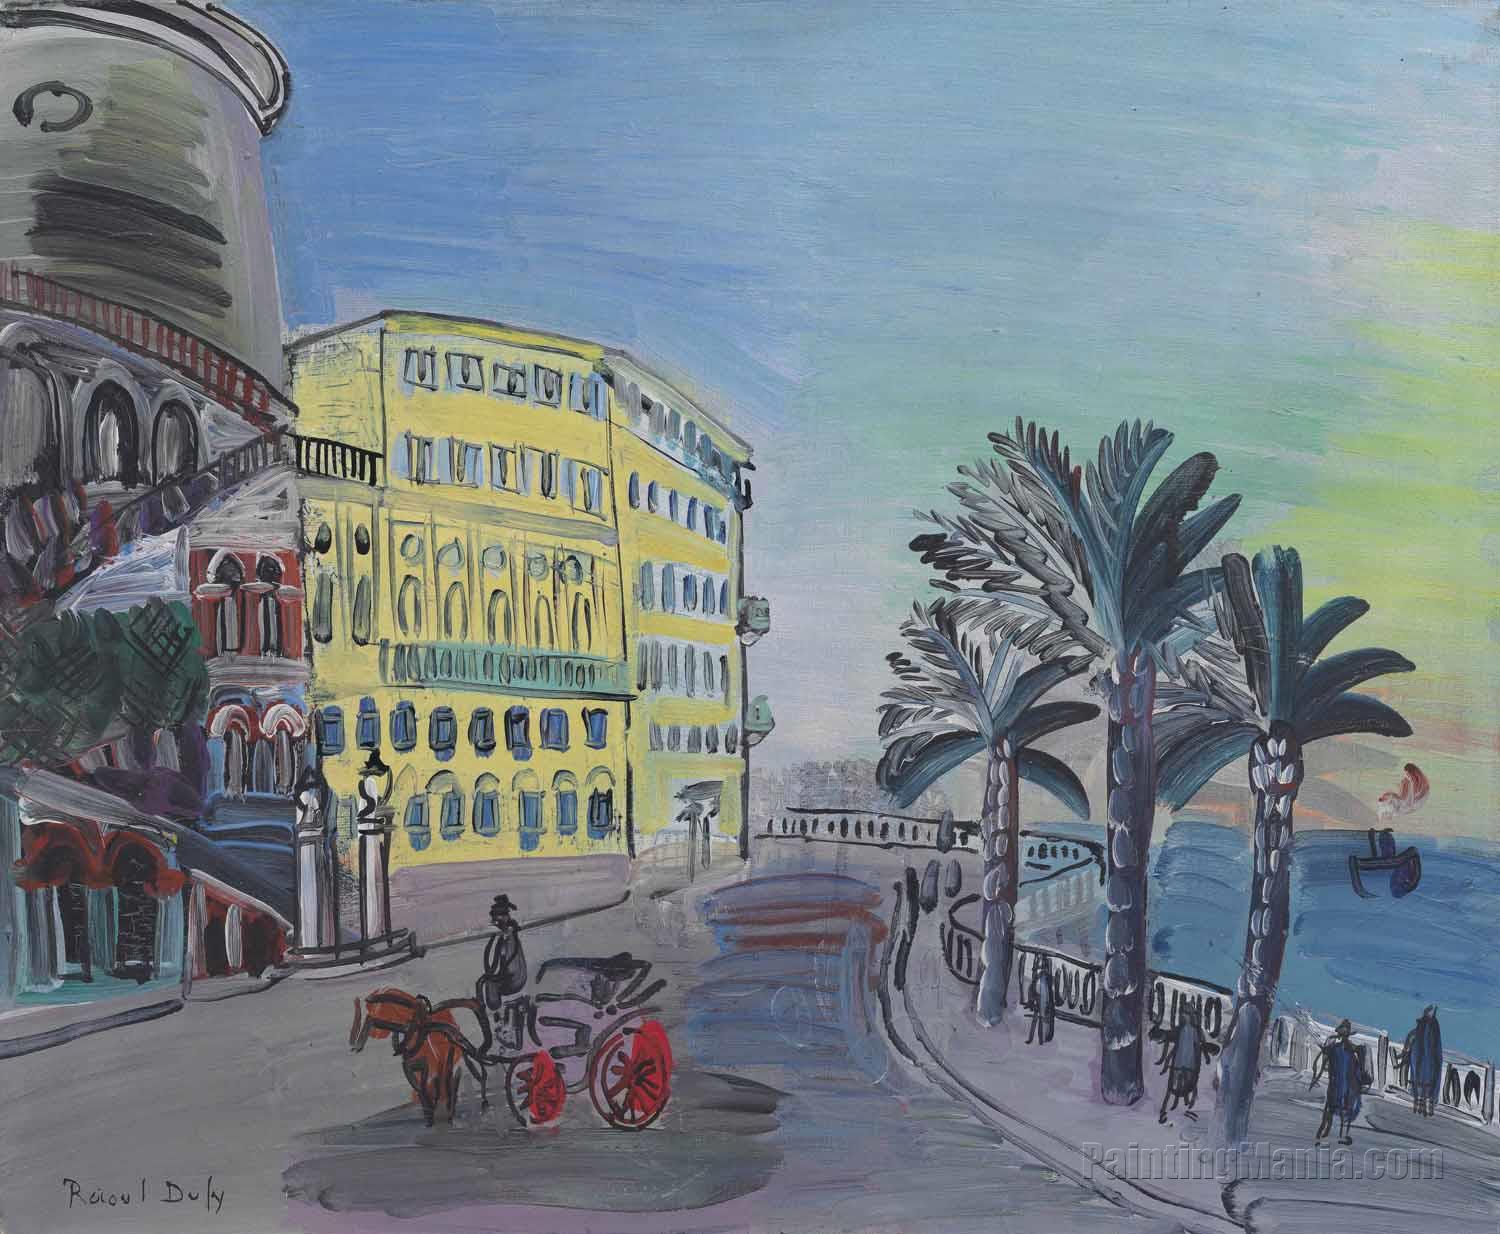 The Hotel Suisse in Nice and the Turning Point of "Rauba Capeu"